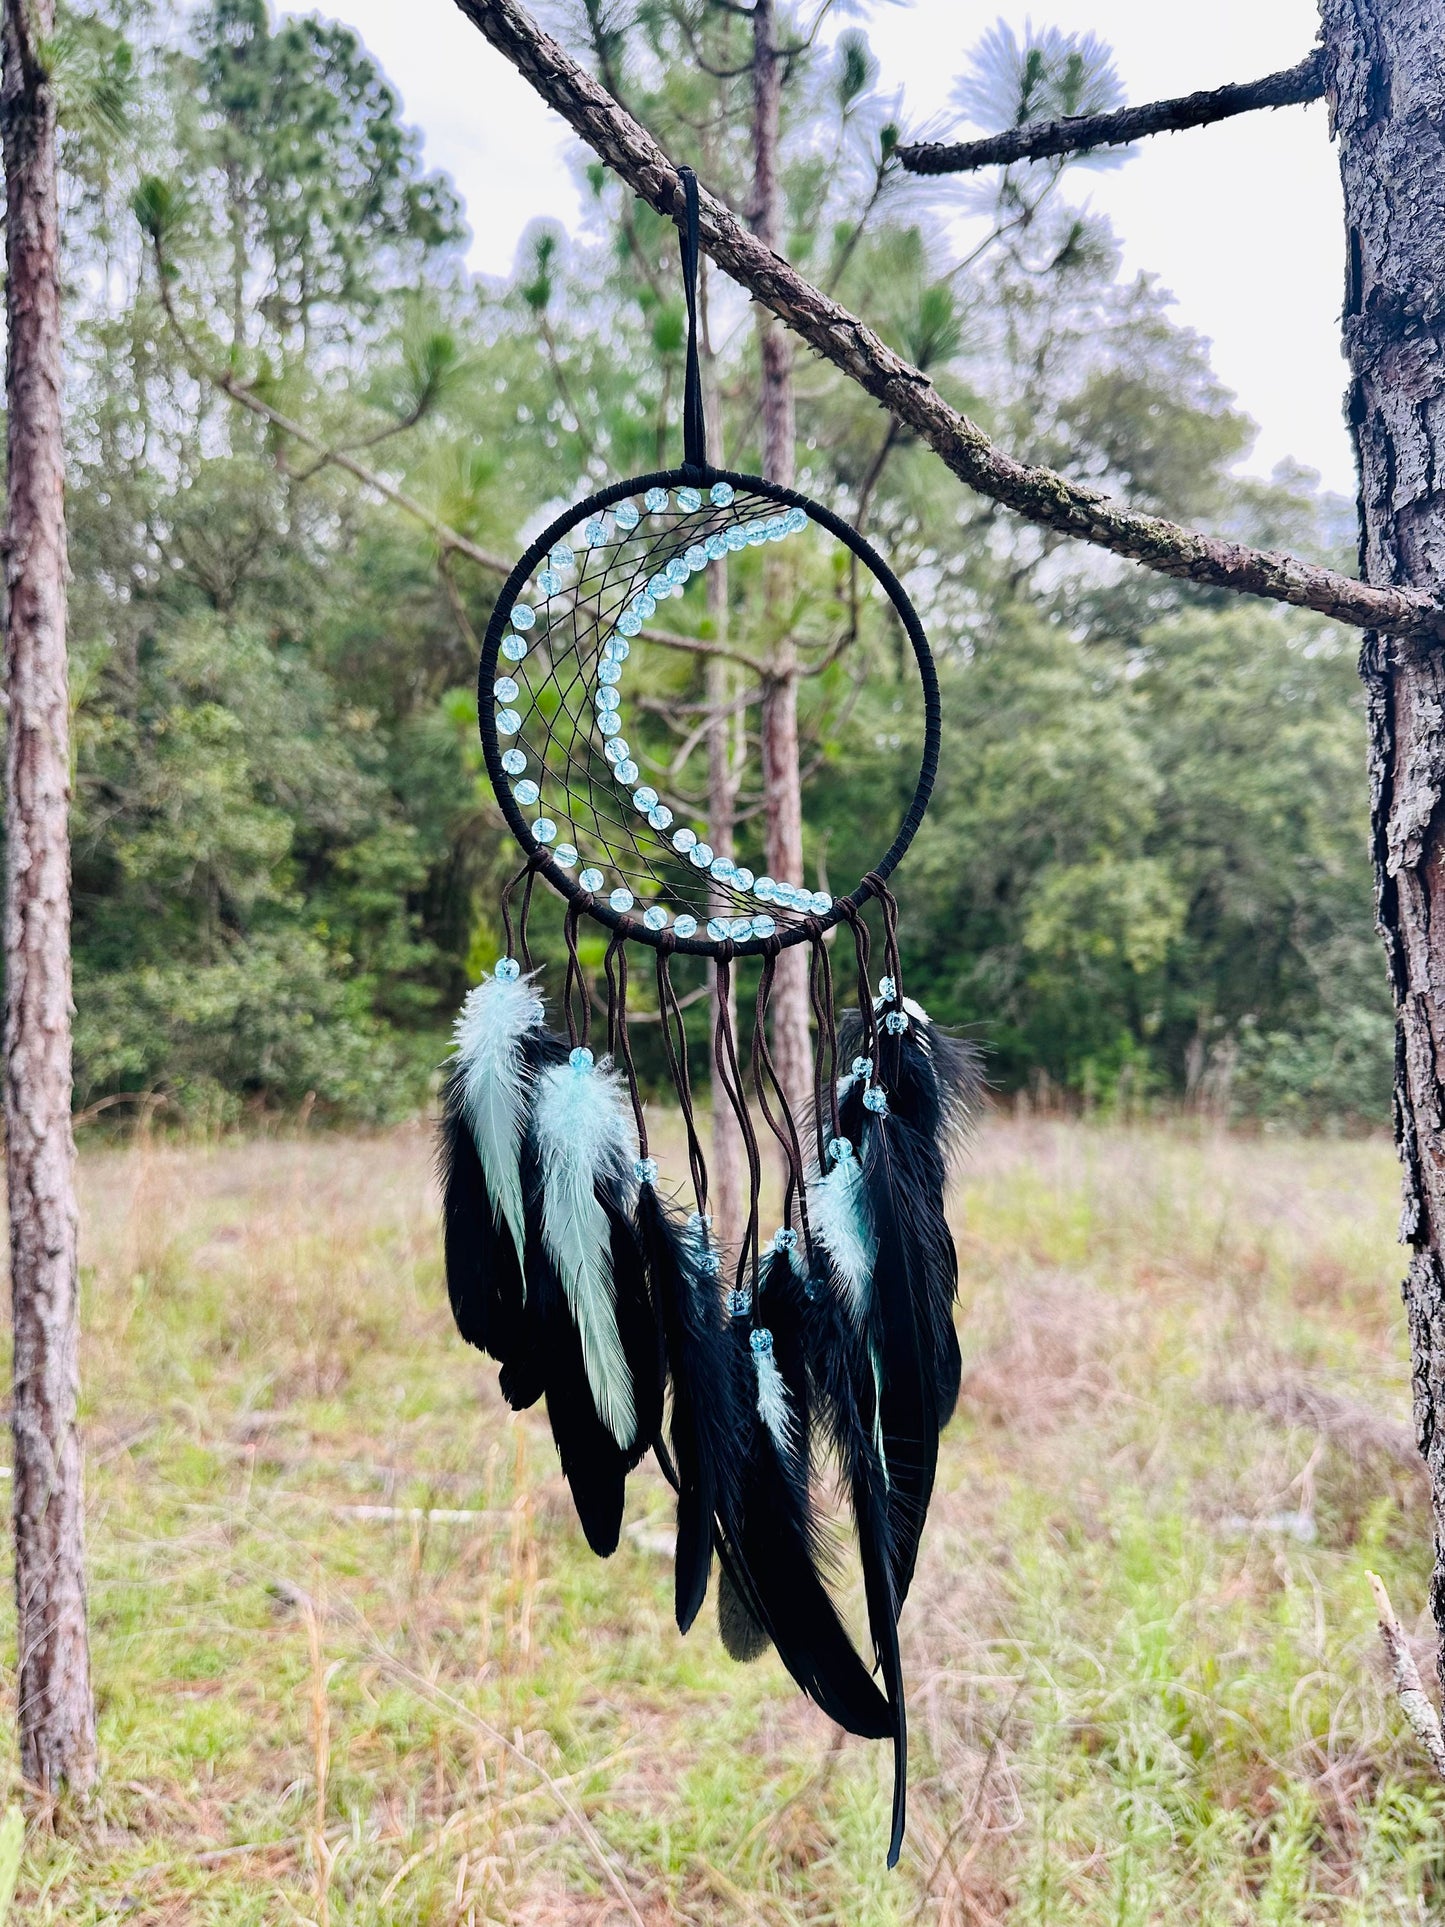 Medium Wall Hanging Crescent Moon Dream Catcher with Black & Light Blue Feathers, Modern Boho Style Home Decor -- Quick Ship!